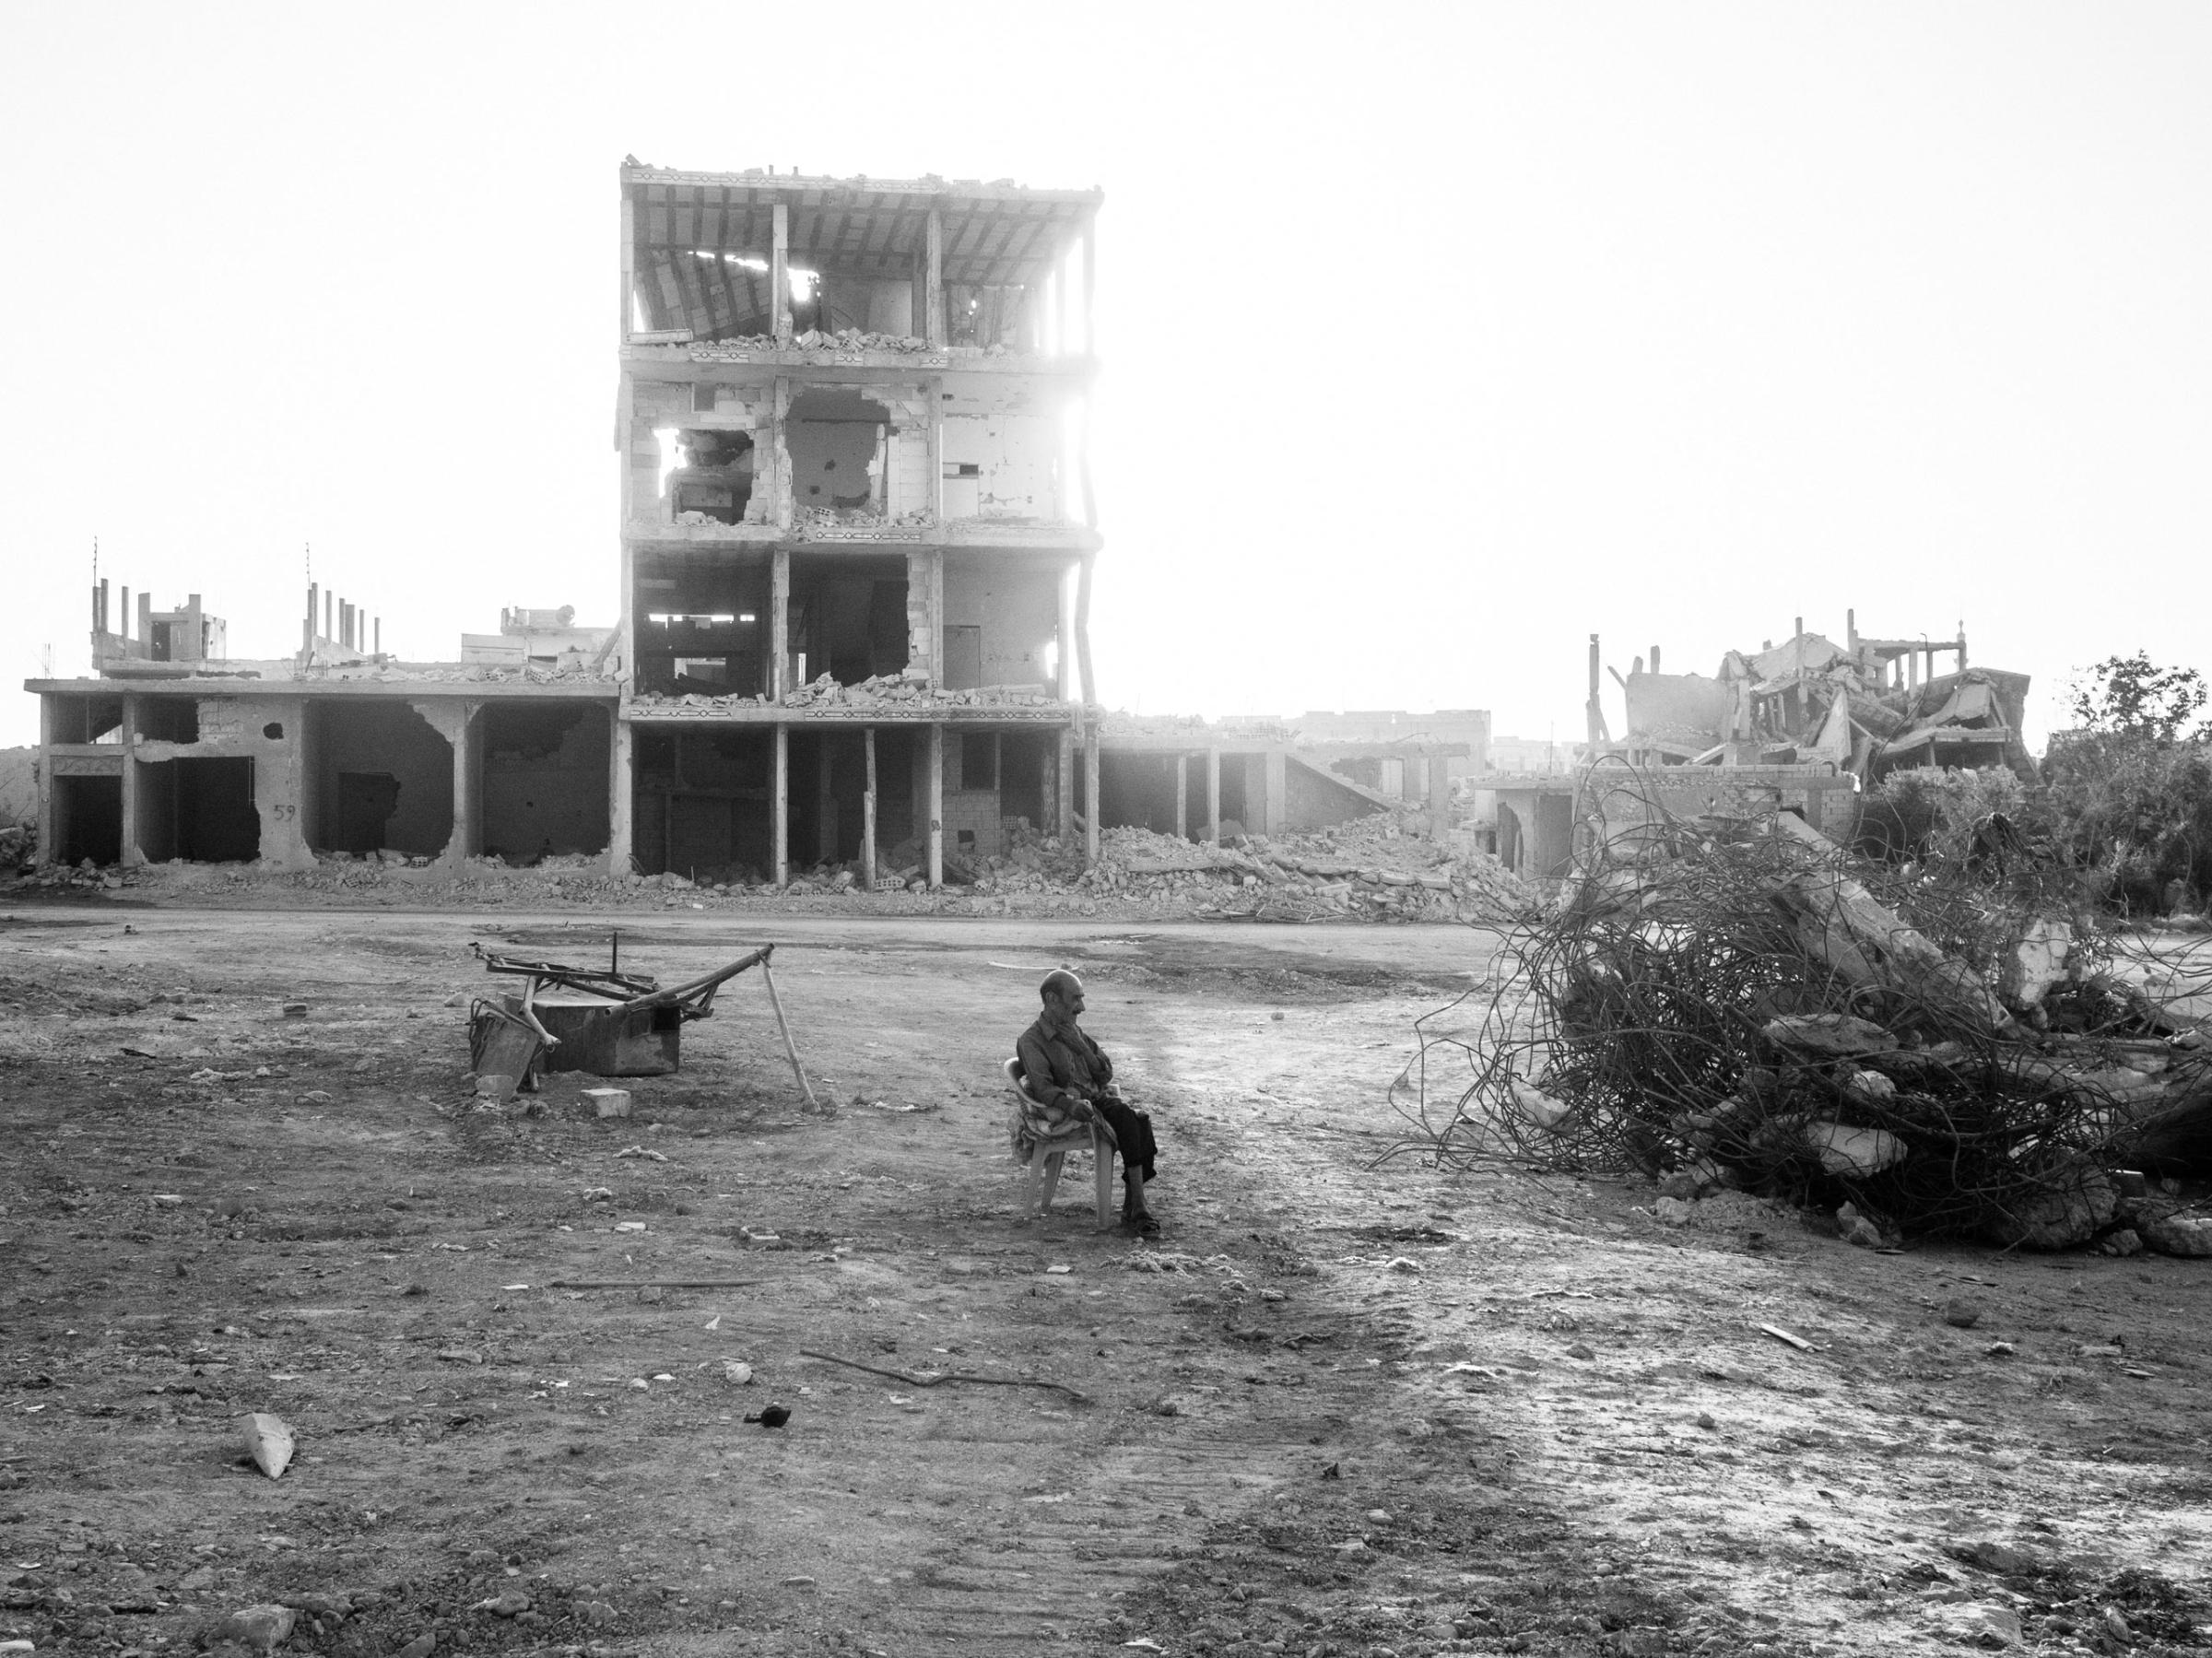 Kobane, Syria. August 8, 2015.A man rests amid rubble in the eastern part of Kobane. In January 2015, the YPG backed by coalition airstrikes succeeded in expelling the Islamic State (IS) from the town. Seventy percent of the city was destroyed by airstrikes and fighting. The YPG now controls the town, which has mostly been reduced to rubble.(Photo by Moises Saman/MAGNUM)